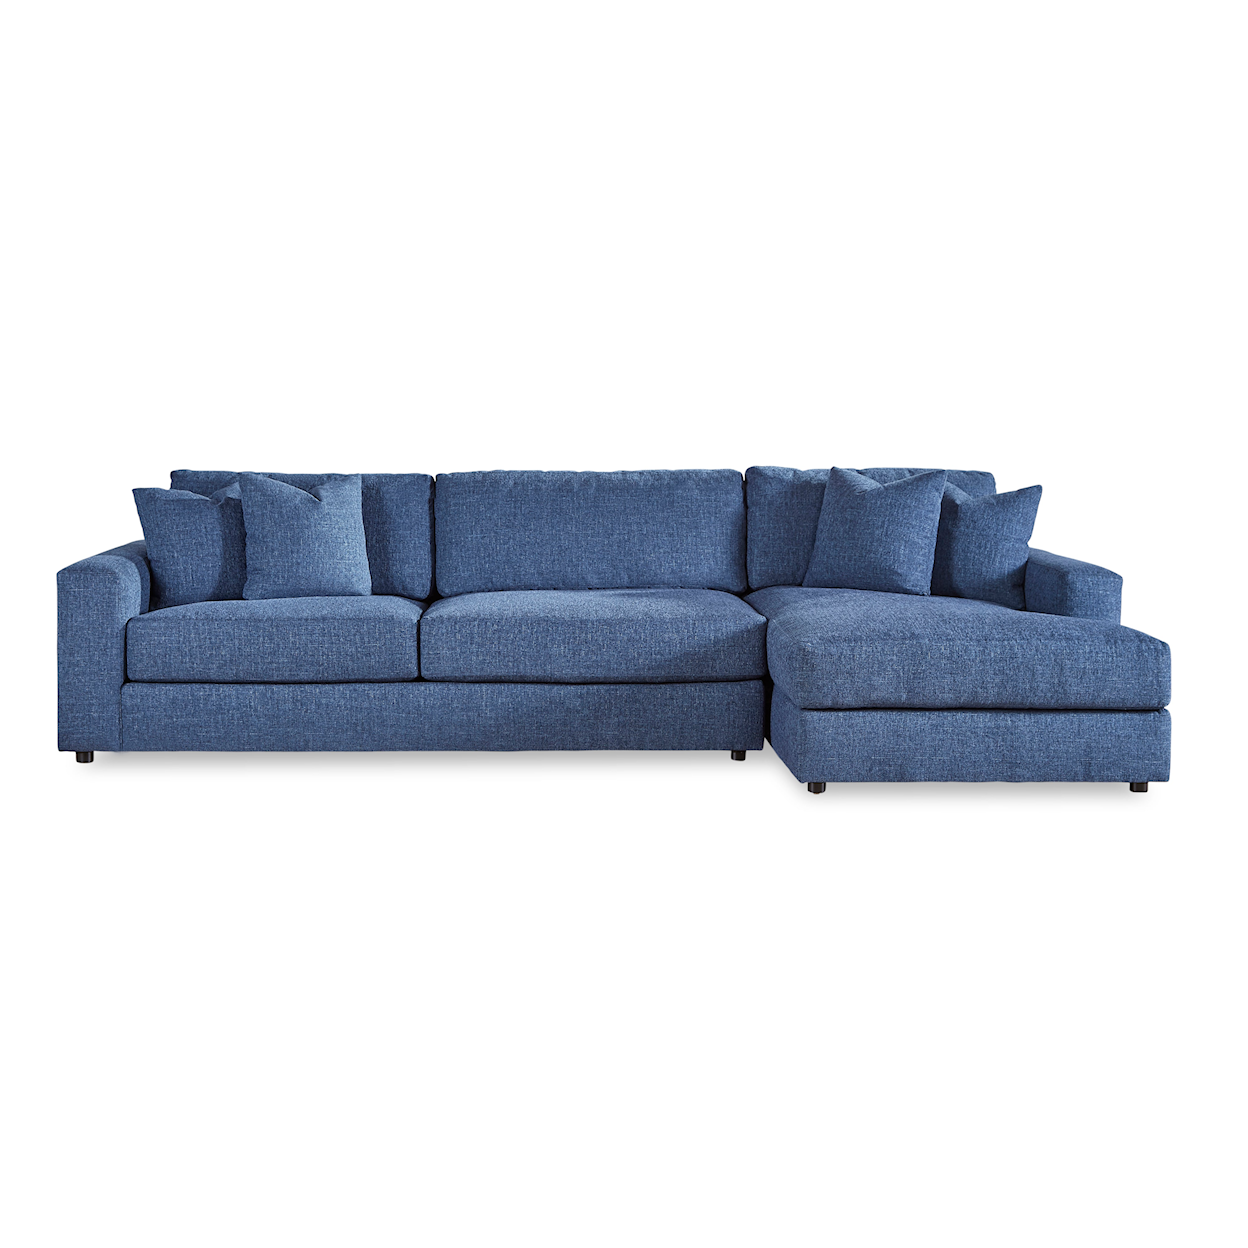 Huntington House 7283 COLLECTION 2-Piece Chaise Sectional